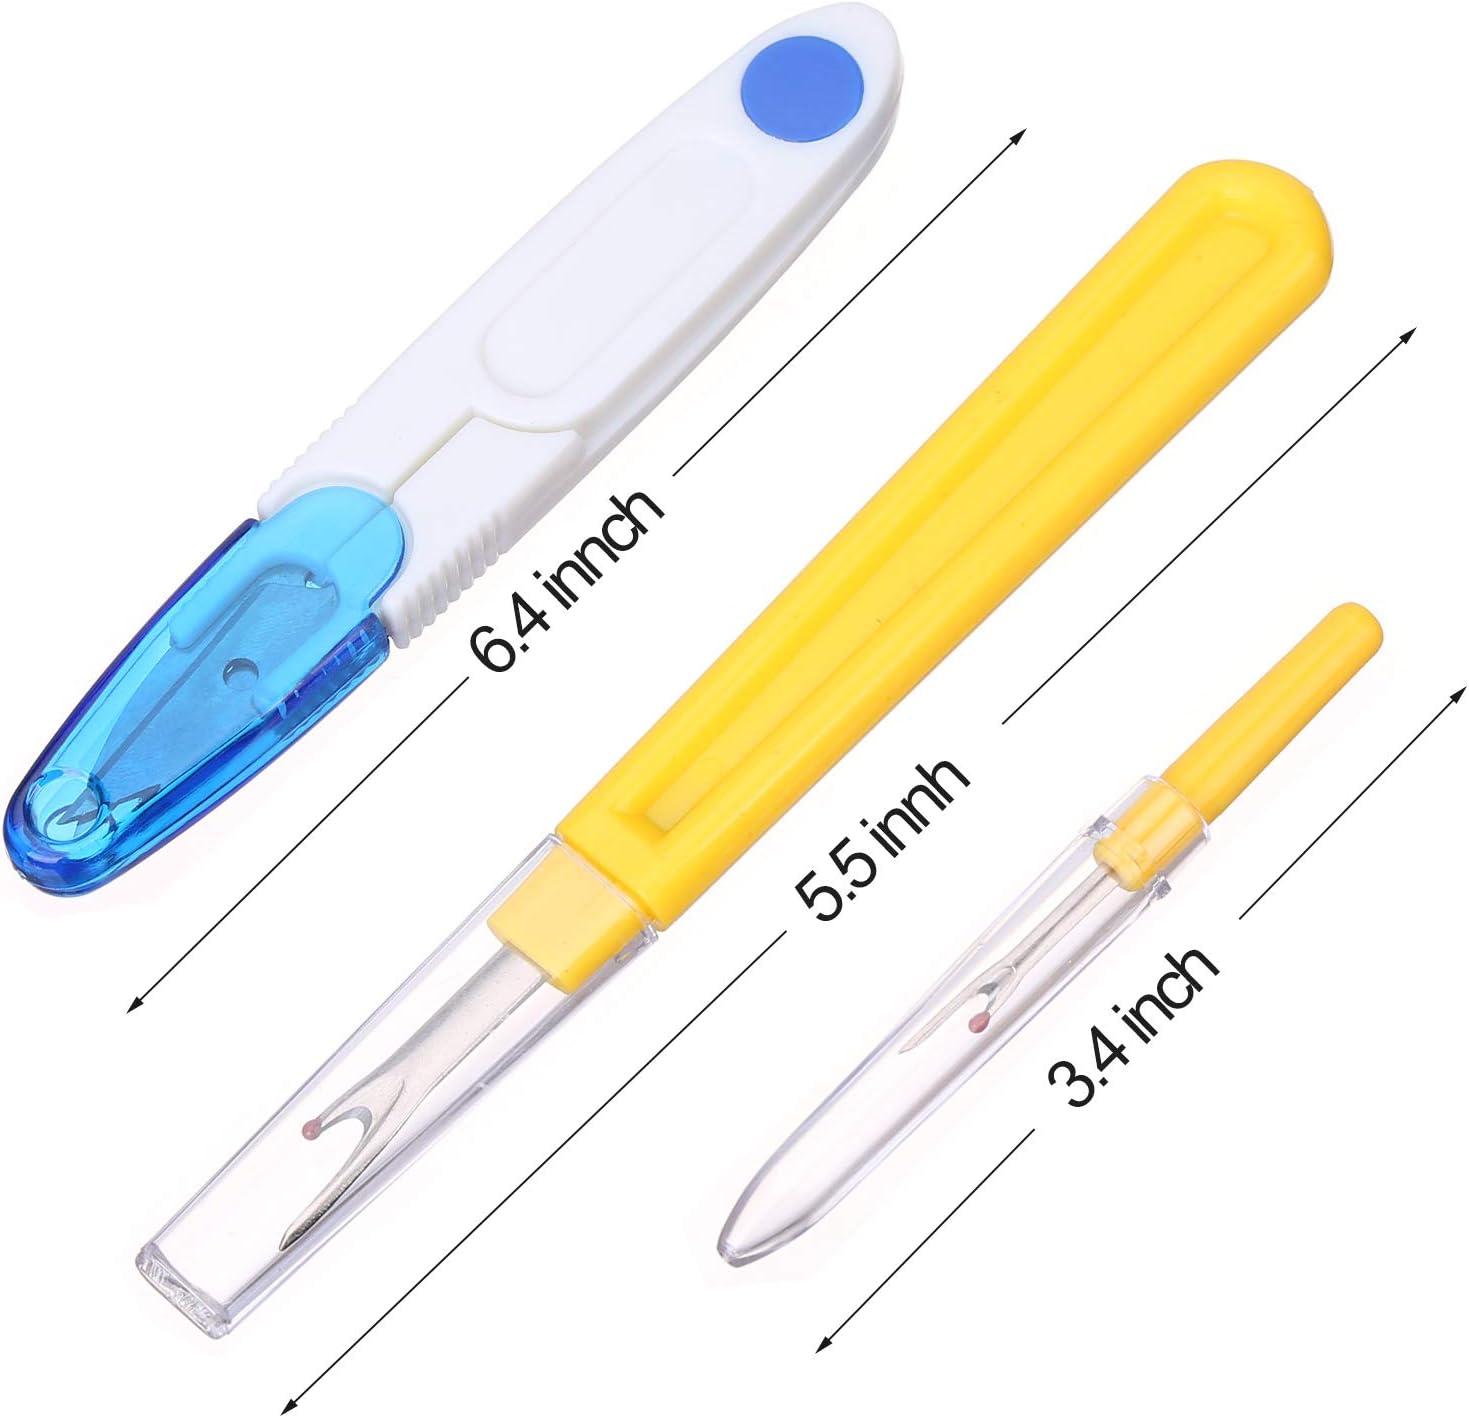 Magideal 4 Pieces Assorted Steel Seam Ripper Sewing Tool Stitch Thread Unpicker Button Hole Cutter with Plastic Handle